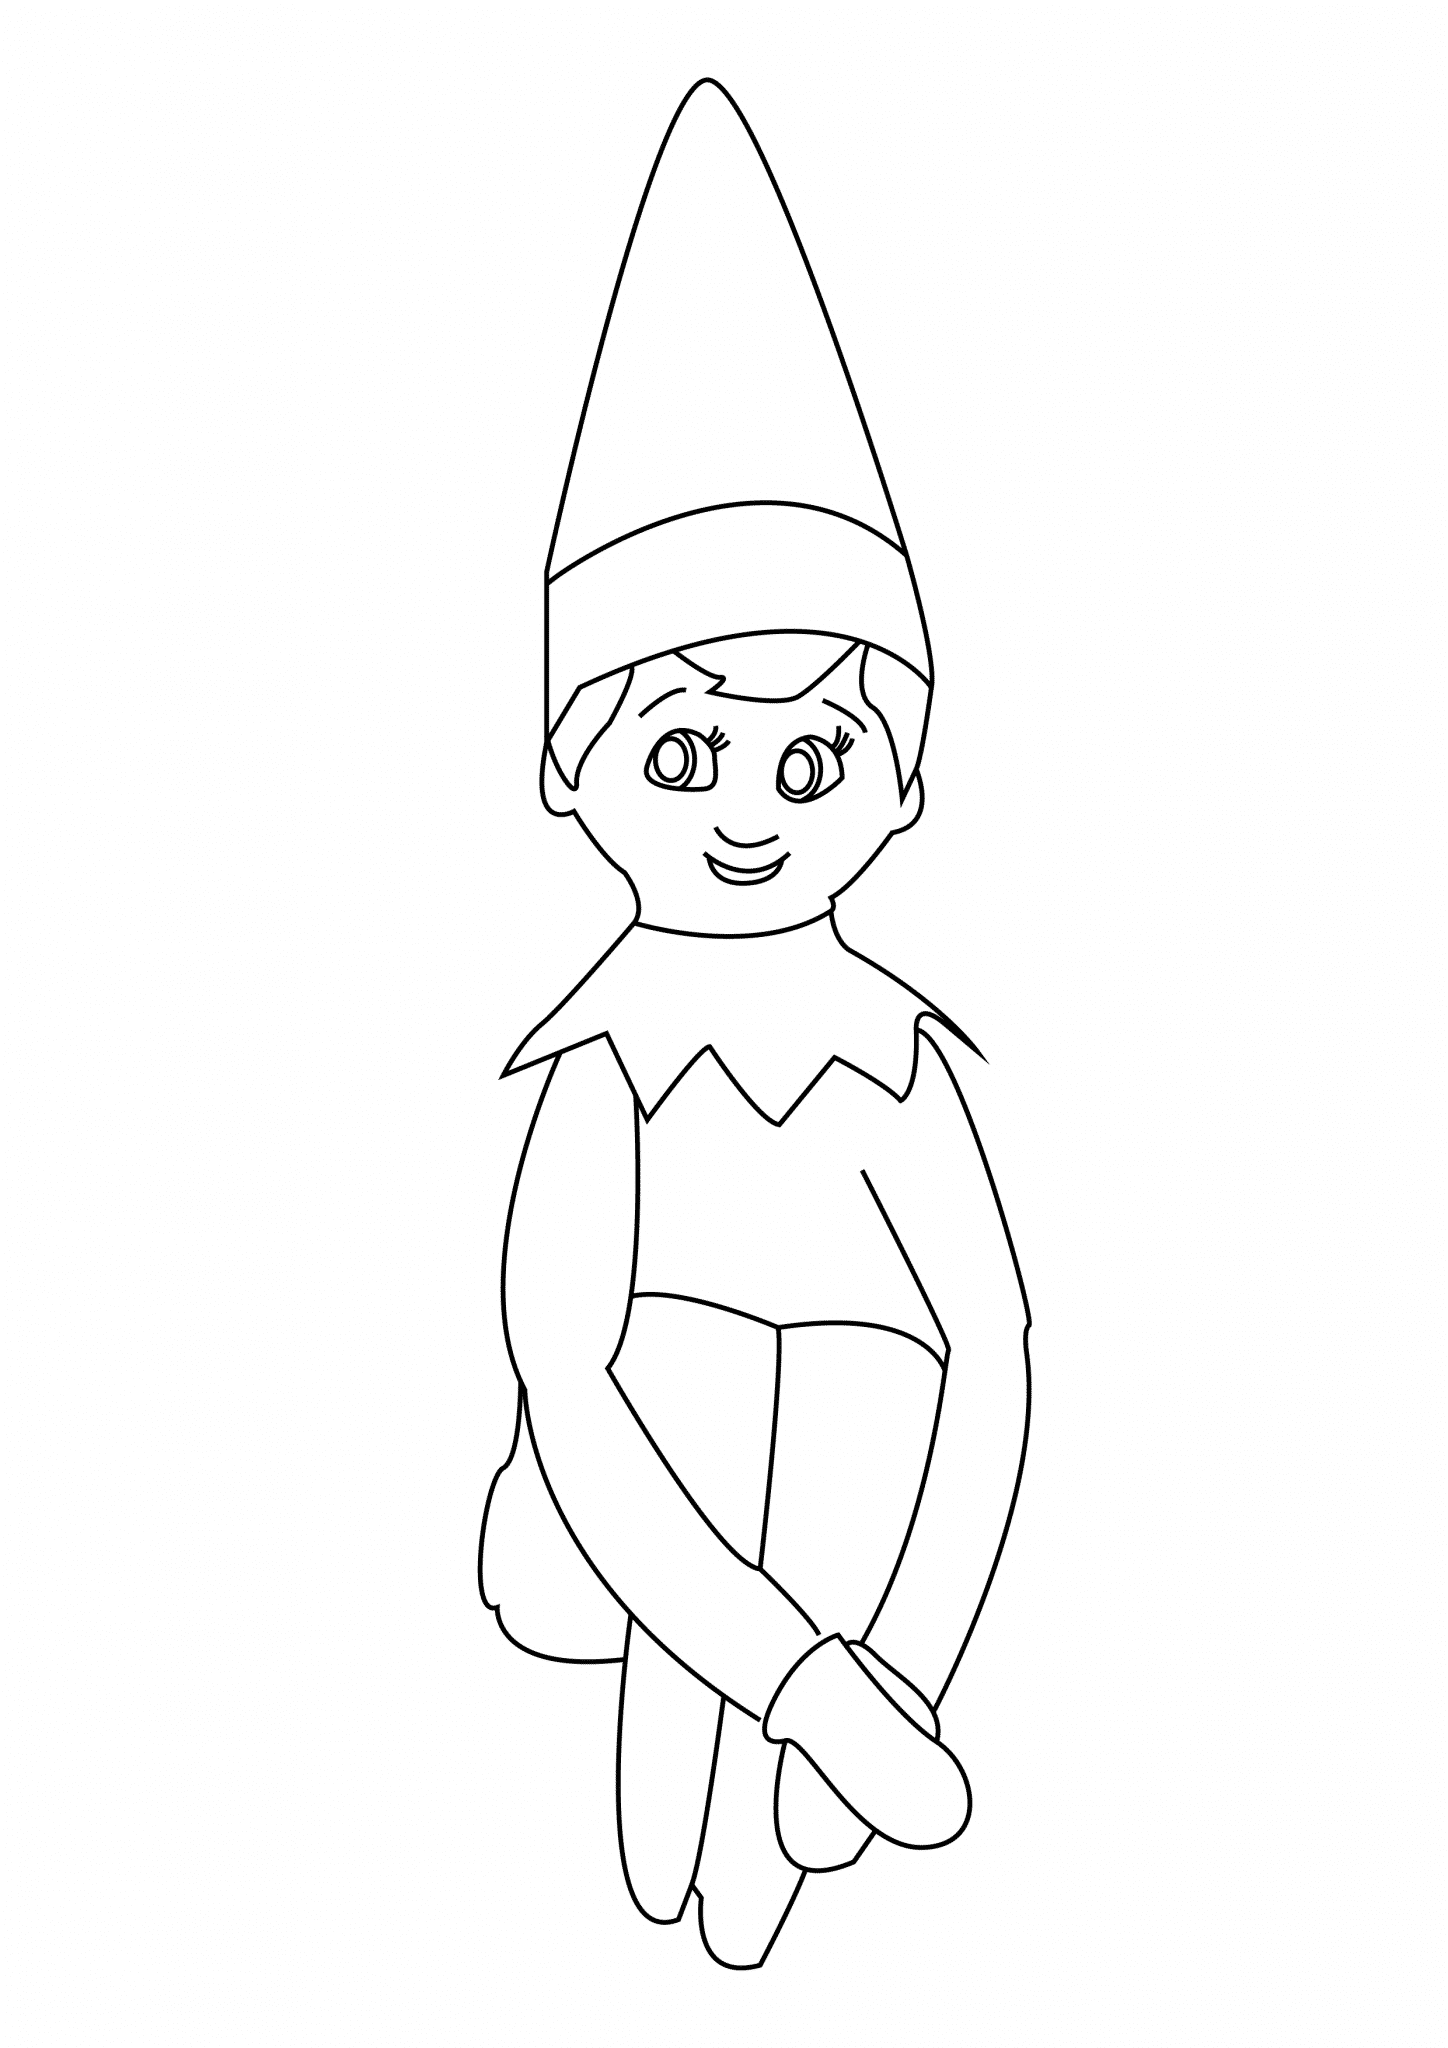 Free Printable Elf on The Shelf Coloring Pages - Tulamama